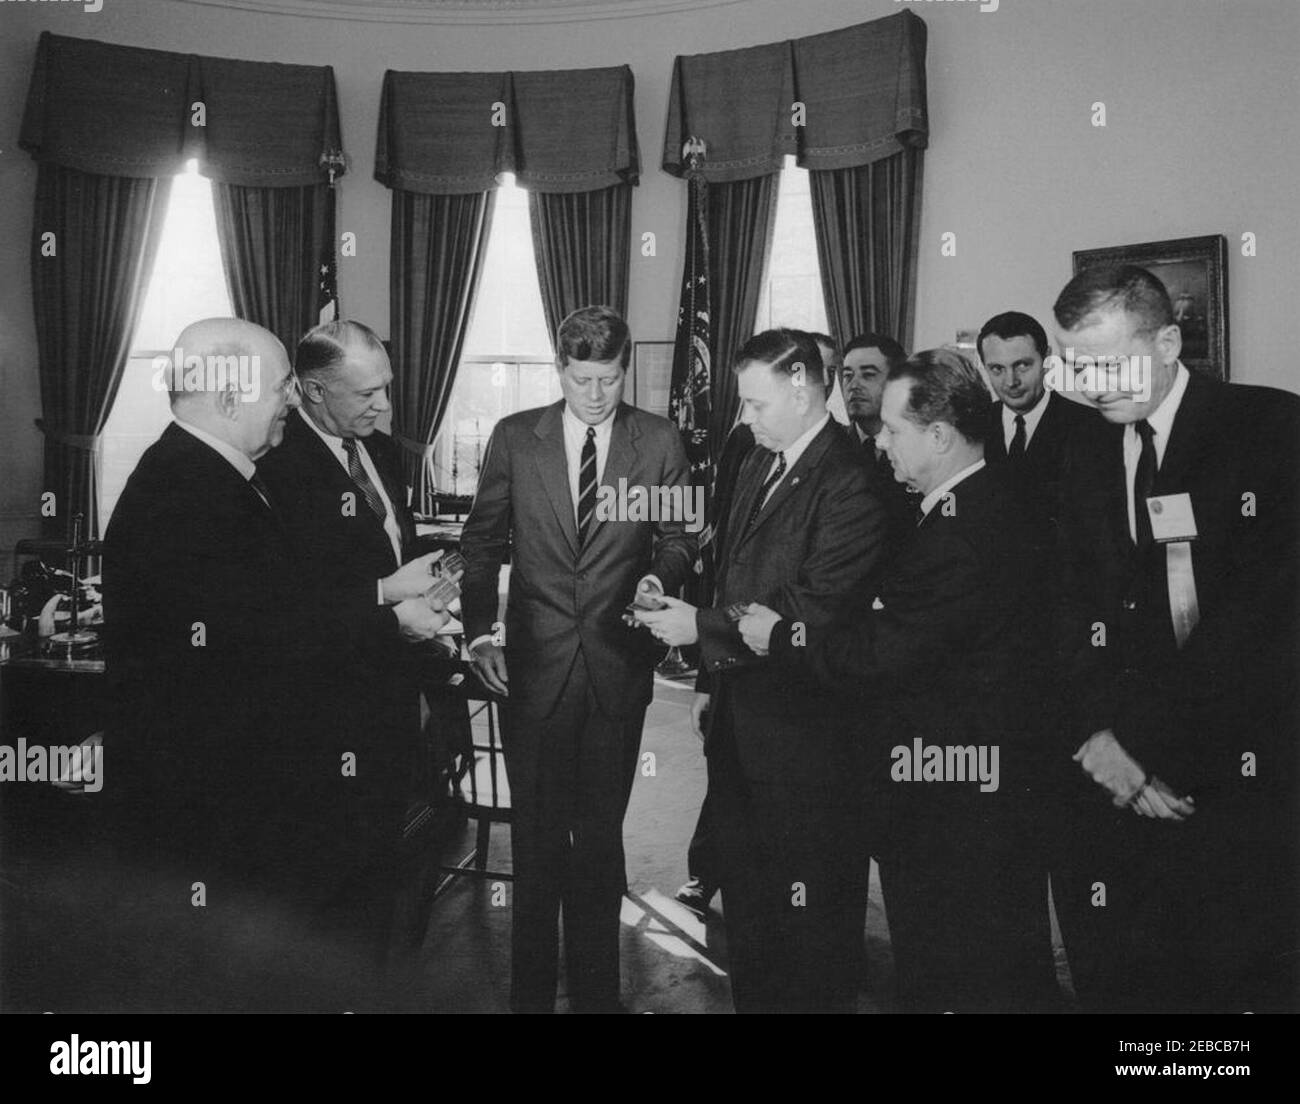 Presentation of honorary life memberships in the armed services associations, 10:00AM. President John F. Kennedy receives honorary life memberships in four armed services organizations; representatives from each organization presented President Kennedy with gold membership cards. Left to right (in foreground): President of the Association of the United States Army, Lieutenant General Milton G. Baker; National Vice President of the Navy League, Harold E. Wirth; President Kennedy; President of the Marine Corps League, Raymond B. Butts; President of the Air Force Association, Major General John B Stock Photo